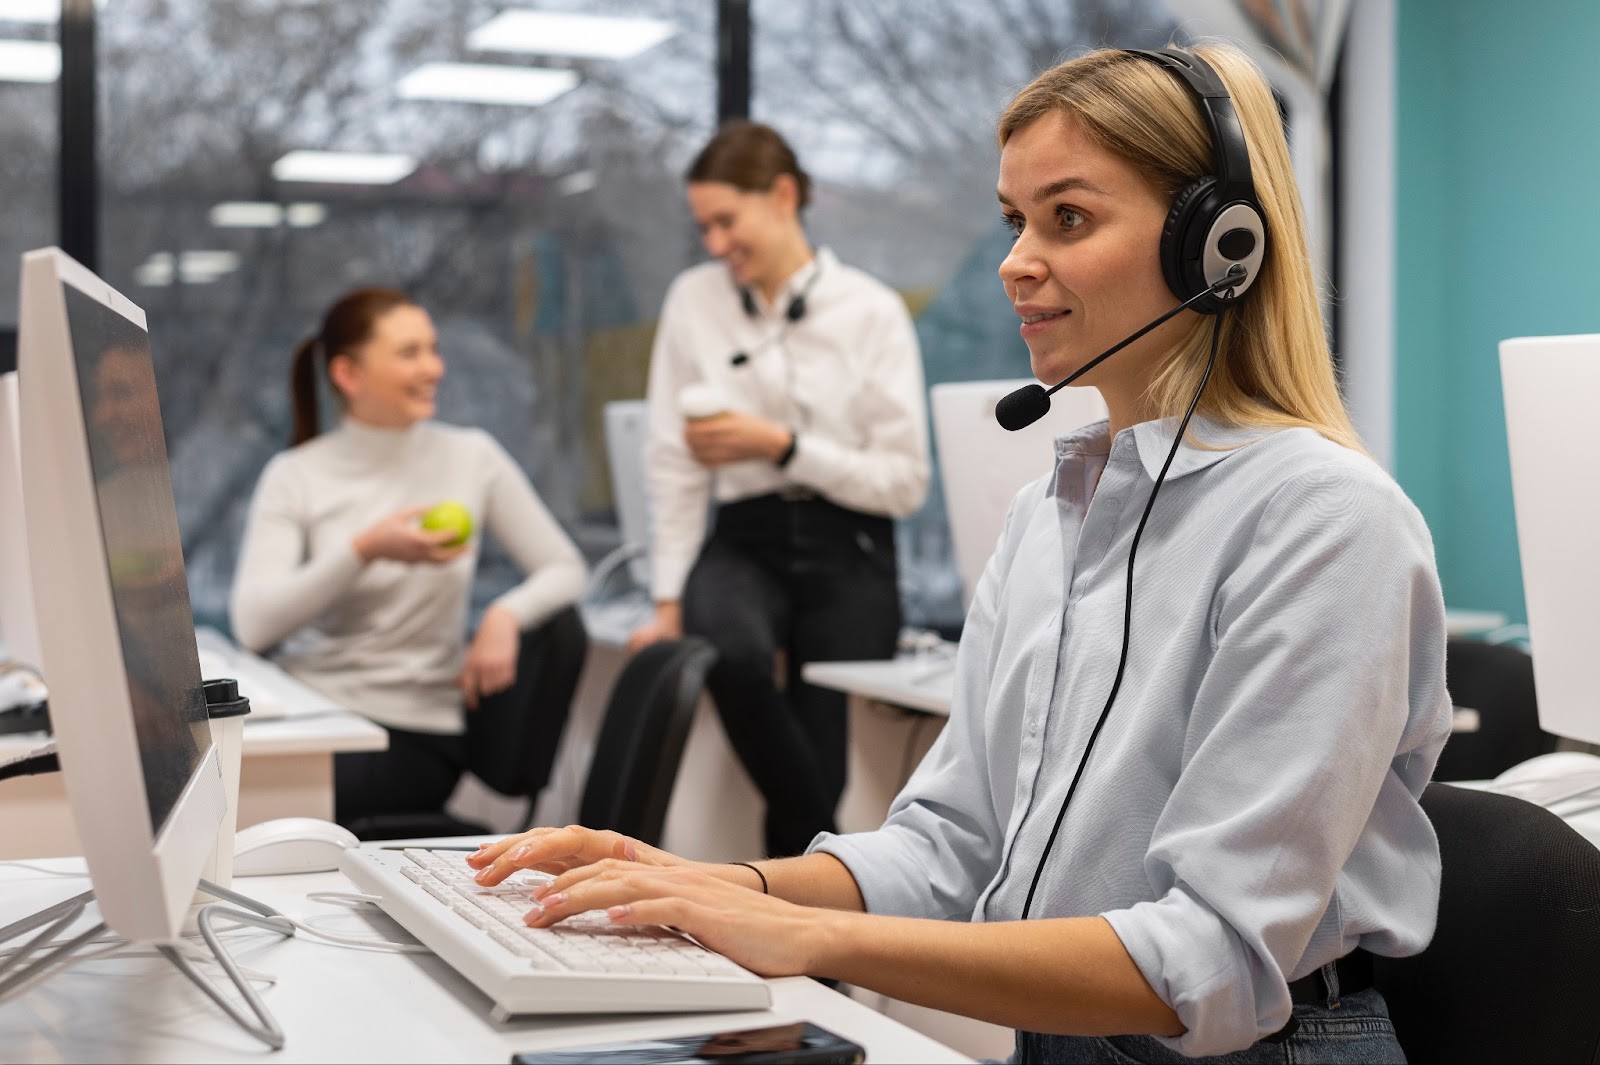 Изображение от <a href="https://ru.freepik.com/free-photo/woman-working-in-a-call-center-talking-with-clients-using-headphones-and-microphone_22196613.htm#page=4&query=%D0%BA%D0%BE%D0%BB%D0%BB%20%D1%86%D0%B5%D0%BD%D1%82%D1%80&position=27&from_view=search&track=ais&uuid=d85e31d6-5af2-45ed-bbf2-4b7636c8bc14#position=27&page=4&query=%D0%BA%D0%BE%D0%BB%D0%BB%20%D1%86%D0%B5%D0%BD%D1%82%D1%80">Freepik</a>Изображение от Fre